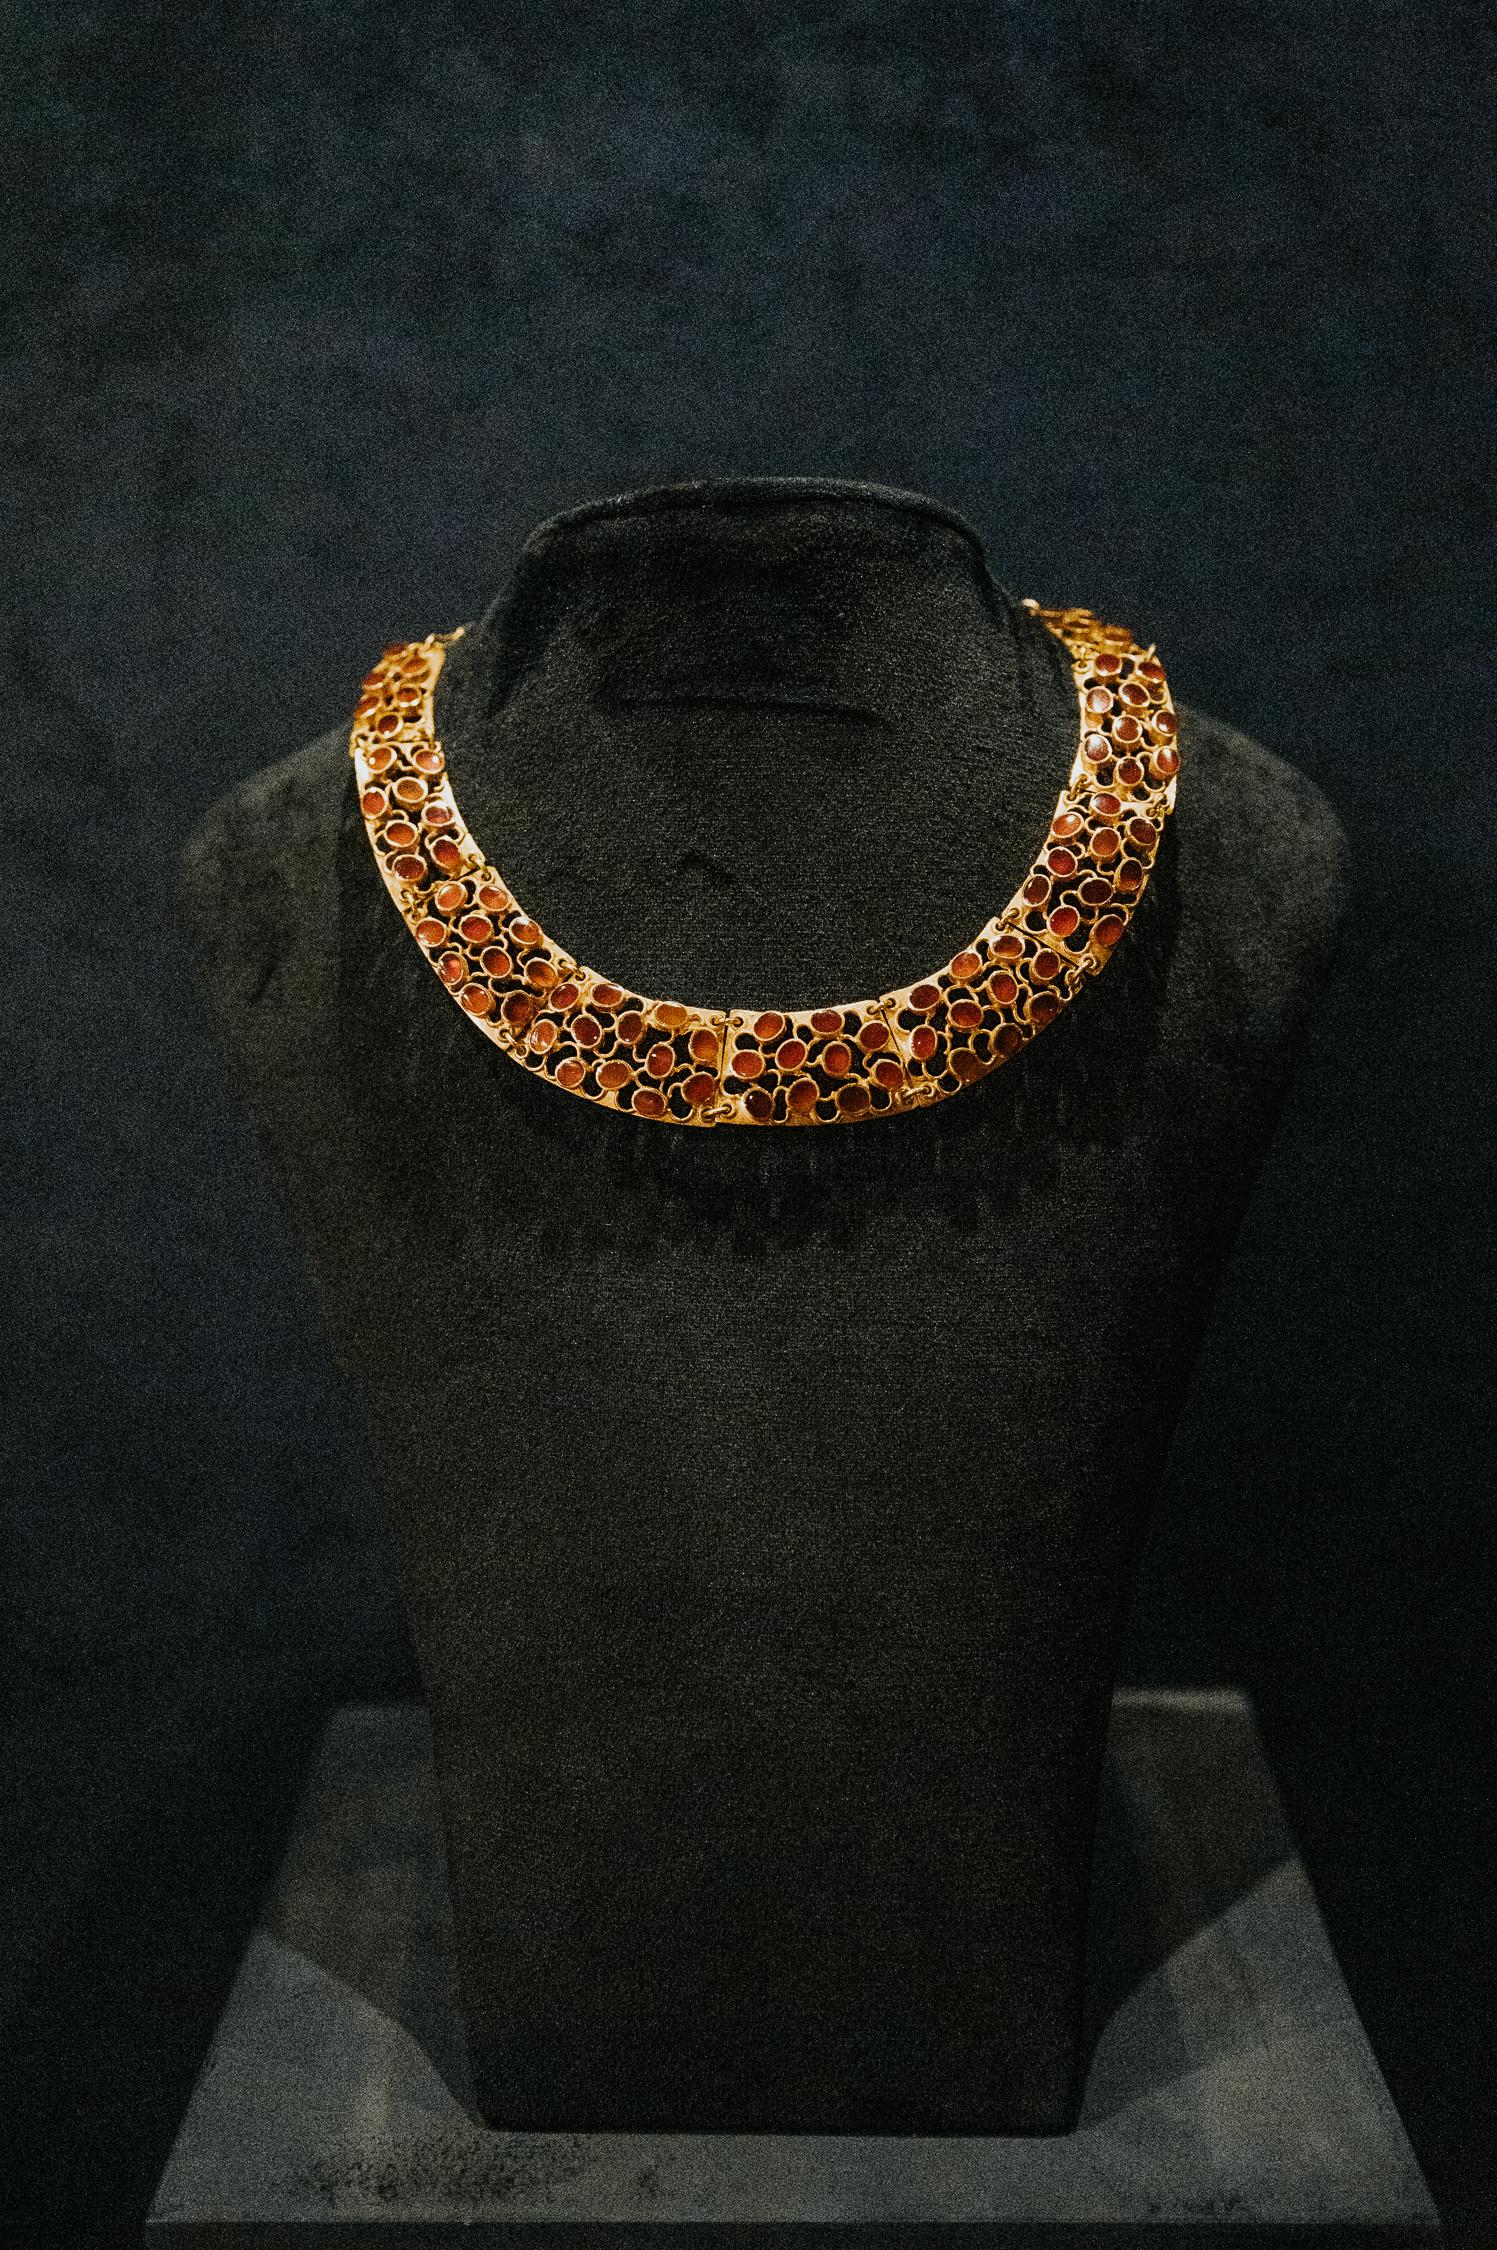 Reproduction of Ancient Egyptian Jewelry & traditional techniques preserved by artisans 
Origin: Saqqara, Egypt 
Design of  Piece: Ancient Egyptian collar necklace/ choker
Symbols Depicted in Piece: Circular Shapes
Material & Precious Stones:  18k